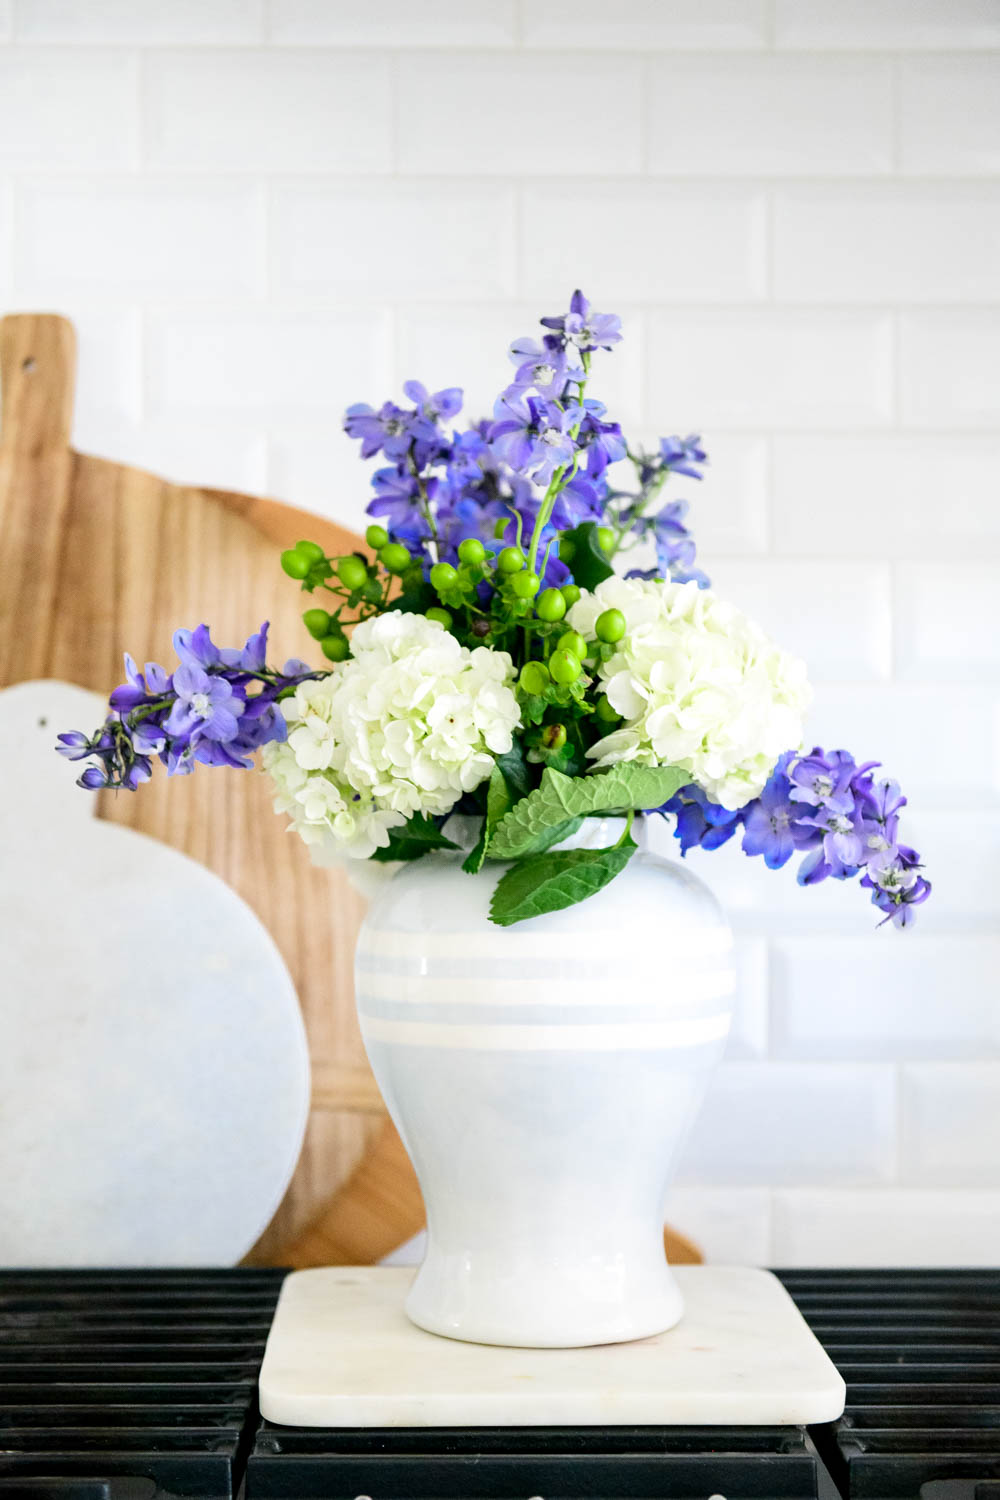 Grocery store flowers, cooktop, kitchen stove, blue and white gingham. #ABlissfulNest #whitekicthen #kitchendecor #kitchenstyle